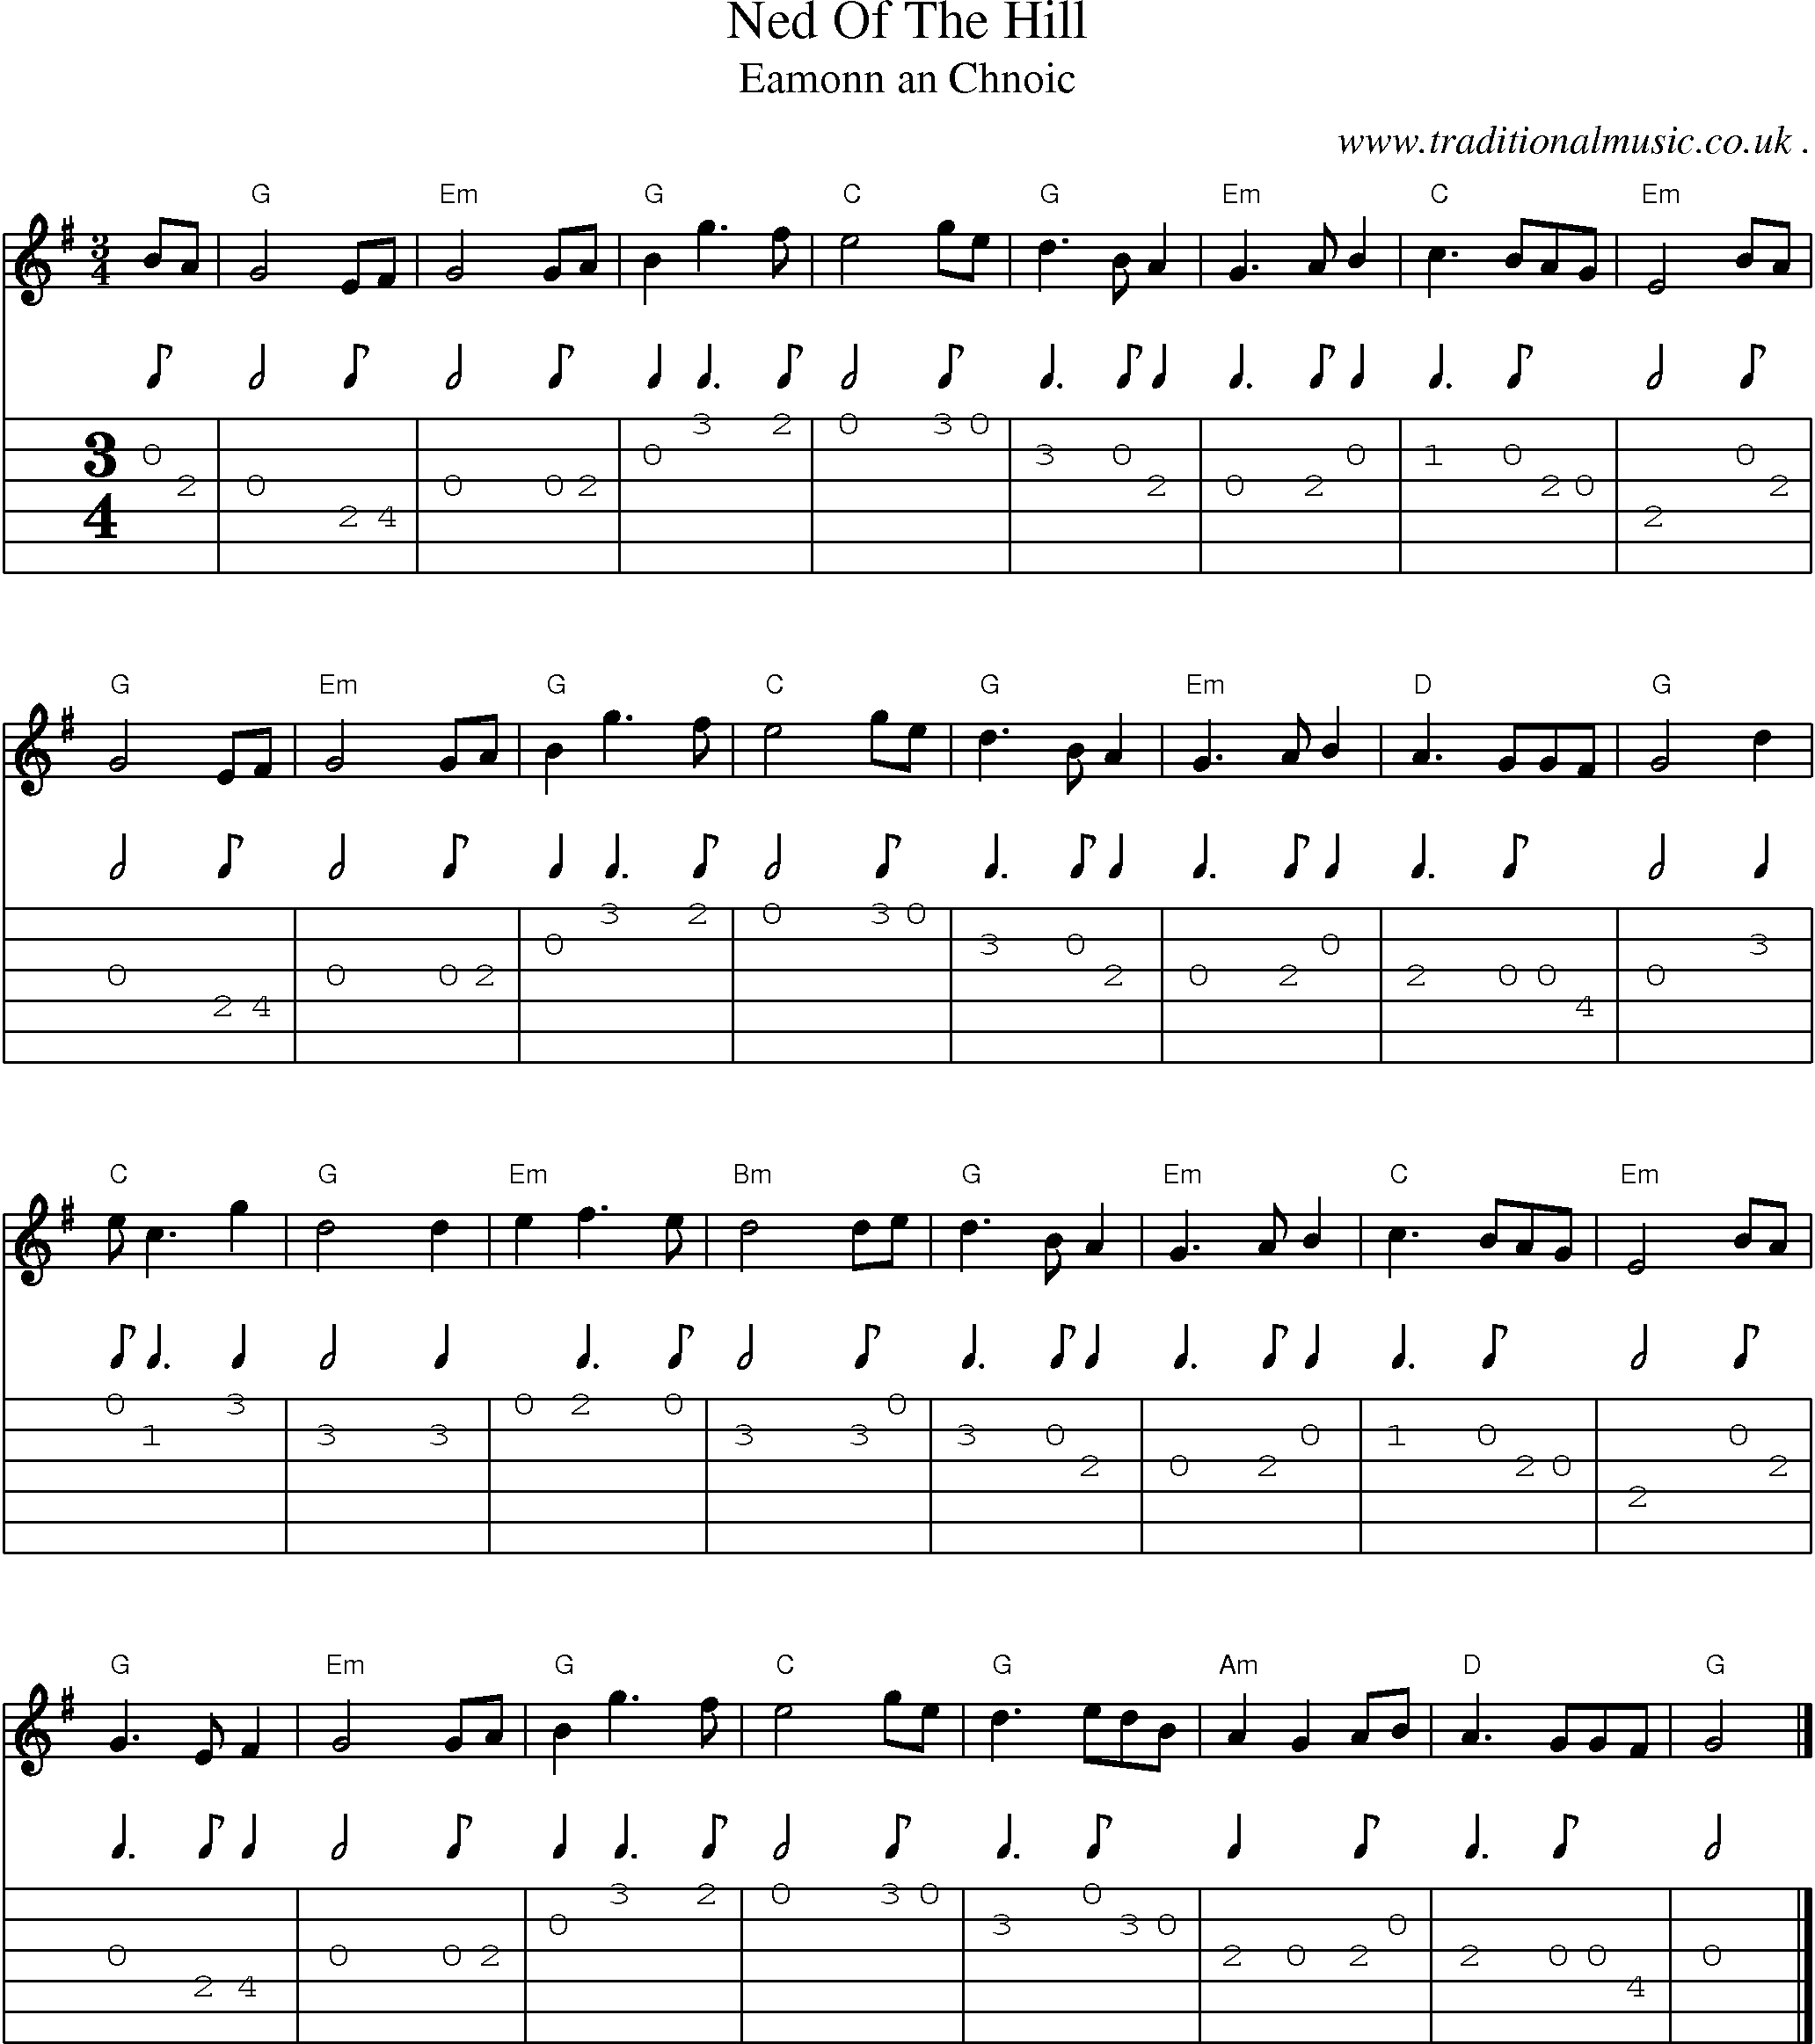 Music Score and Guitar Tabs for Ned Of The Hill